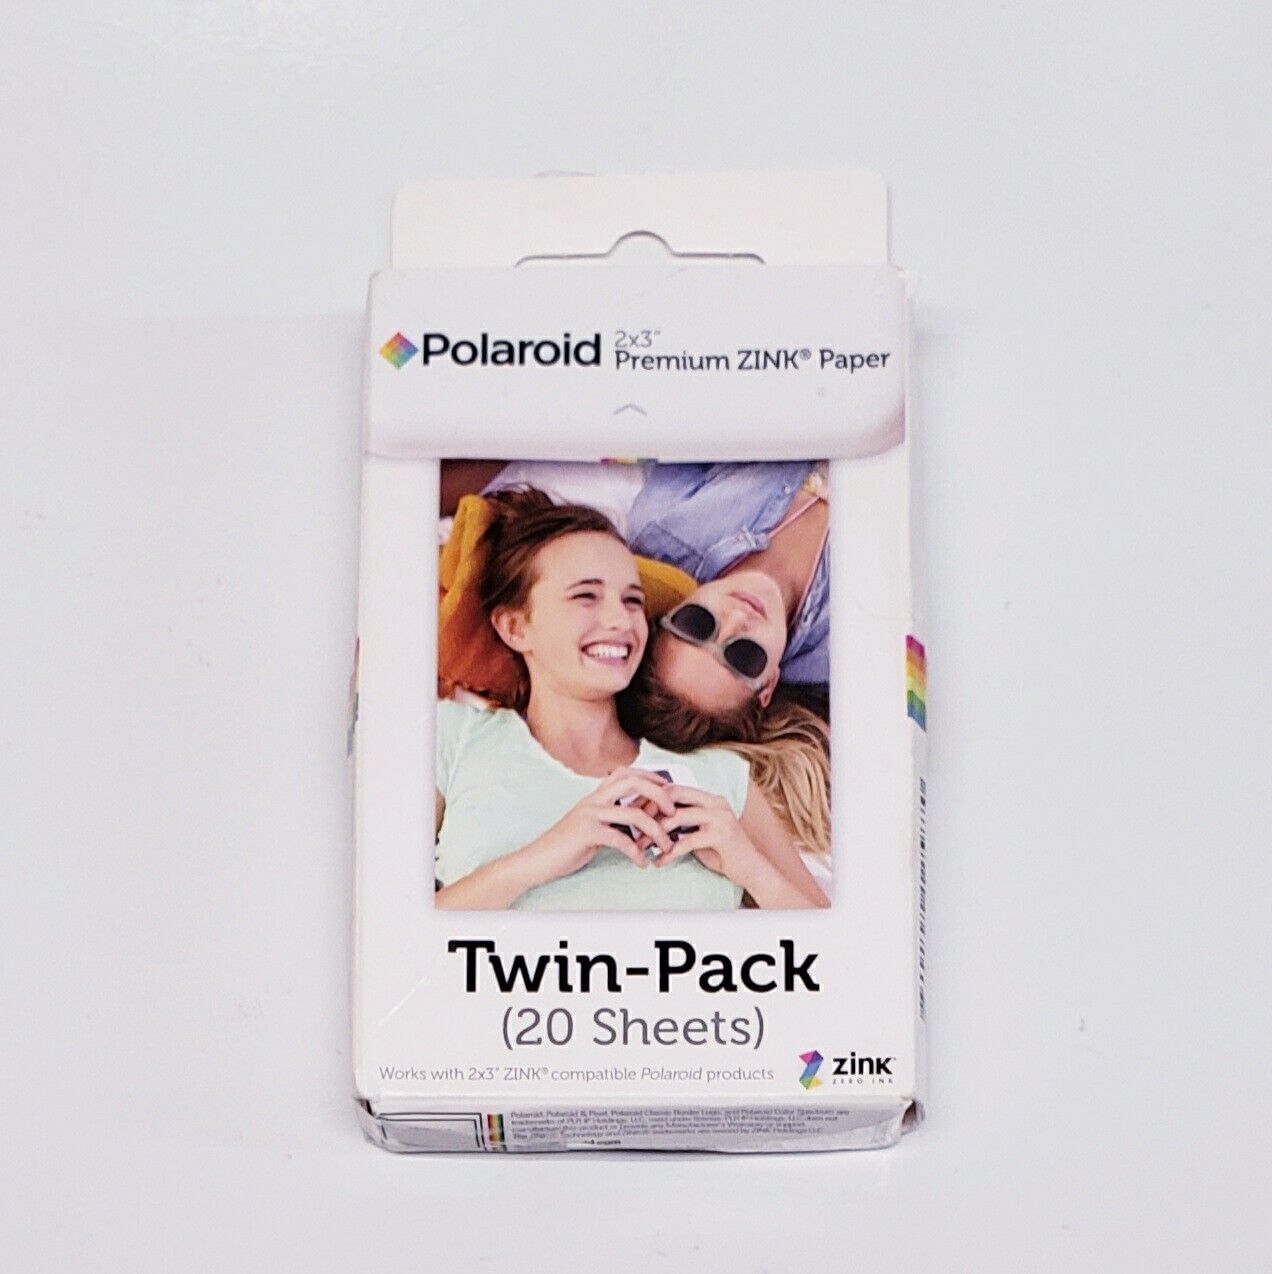 Polaroid 2x3 inch Premium ZINK Photo Paper TWIN PACK (20 Sheets) New